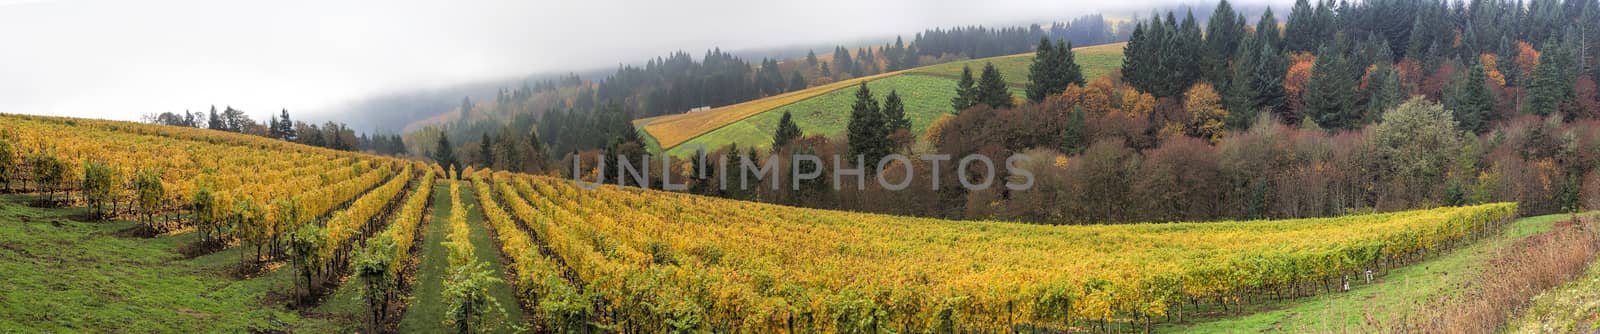 Dundee Oregon Vineyards on Rolling Hills with Morning Fog in Fall Season Panorama